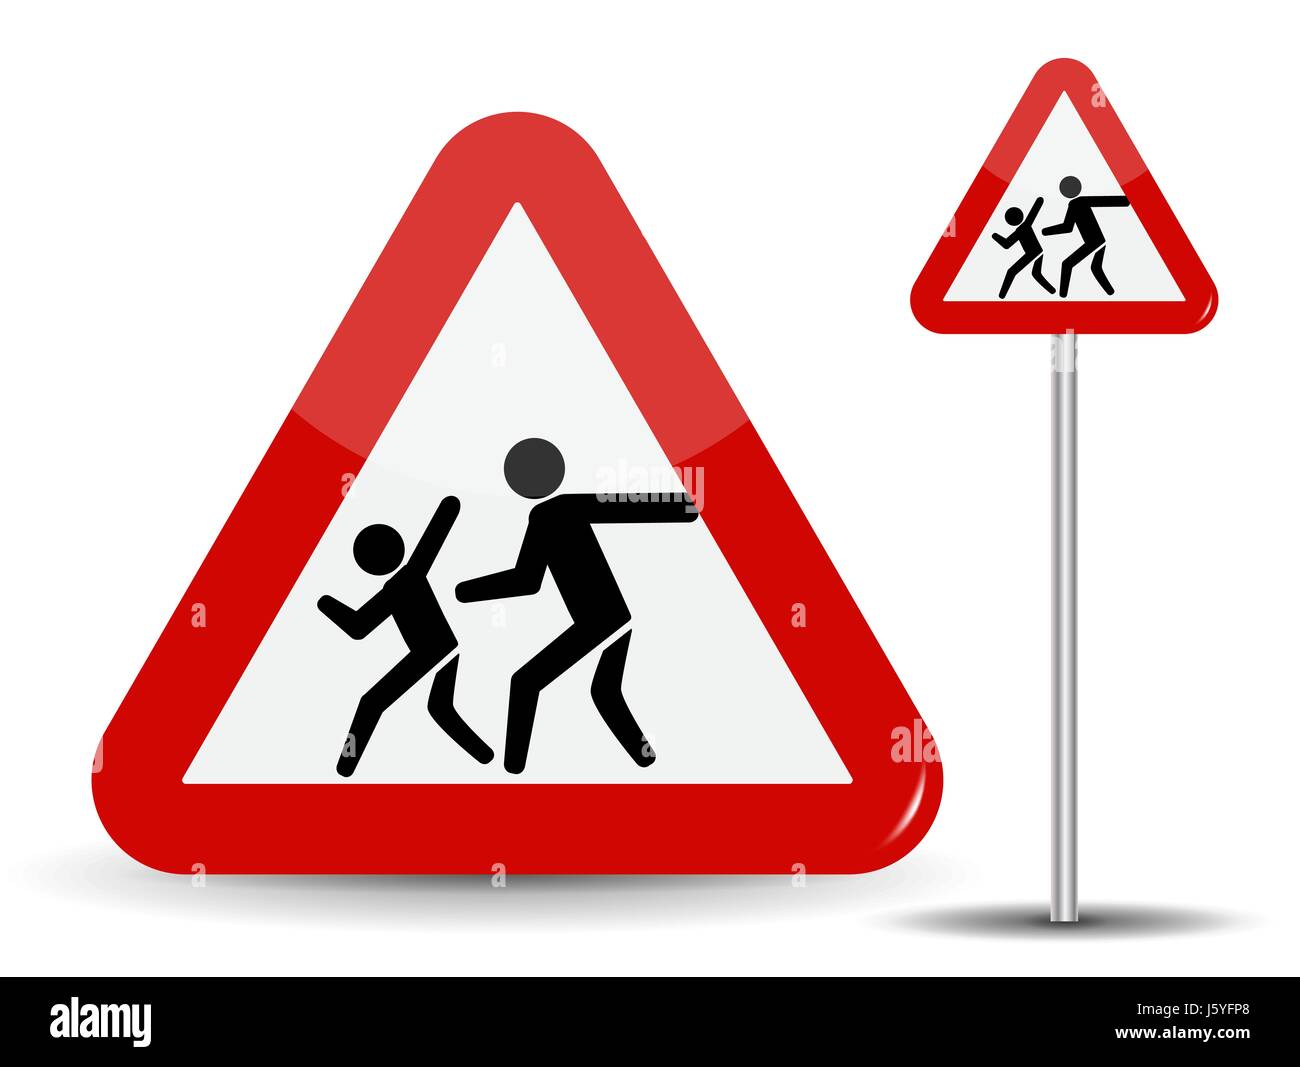 Road sign Warning Children. In the Red Triangle running kids. Vector Illustration. Stock Vector